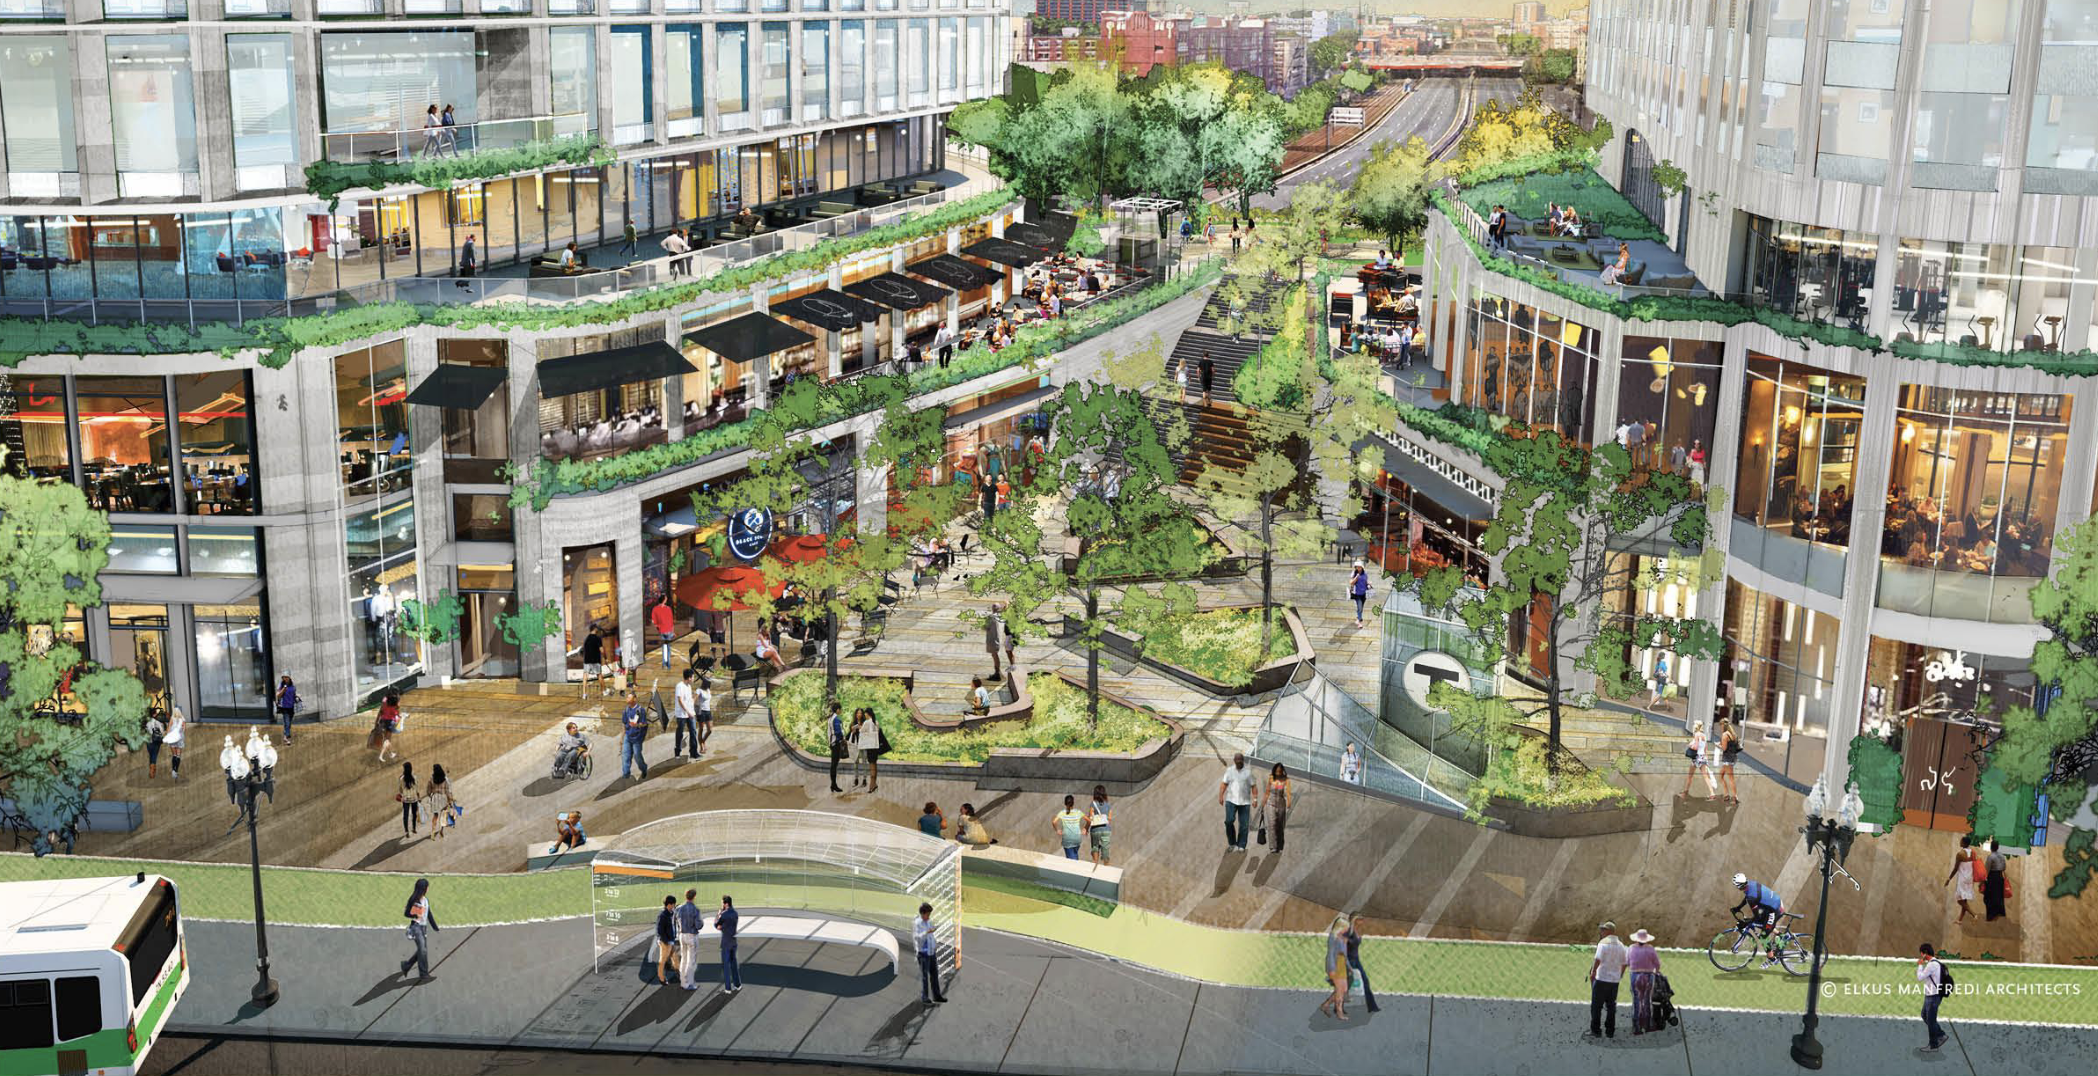 An architect's rendering of a plaza with trees and people between two tall buildings. On one side is a glass stair and elevator enclosure with the MBTA T logo. In the foreground is a bike path winding behind a glass bus shelter along the curb.